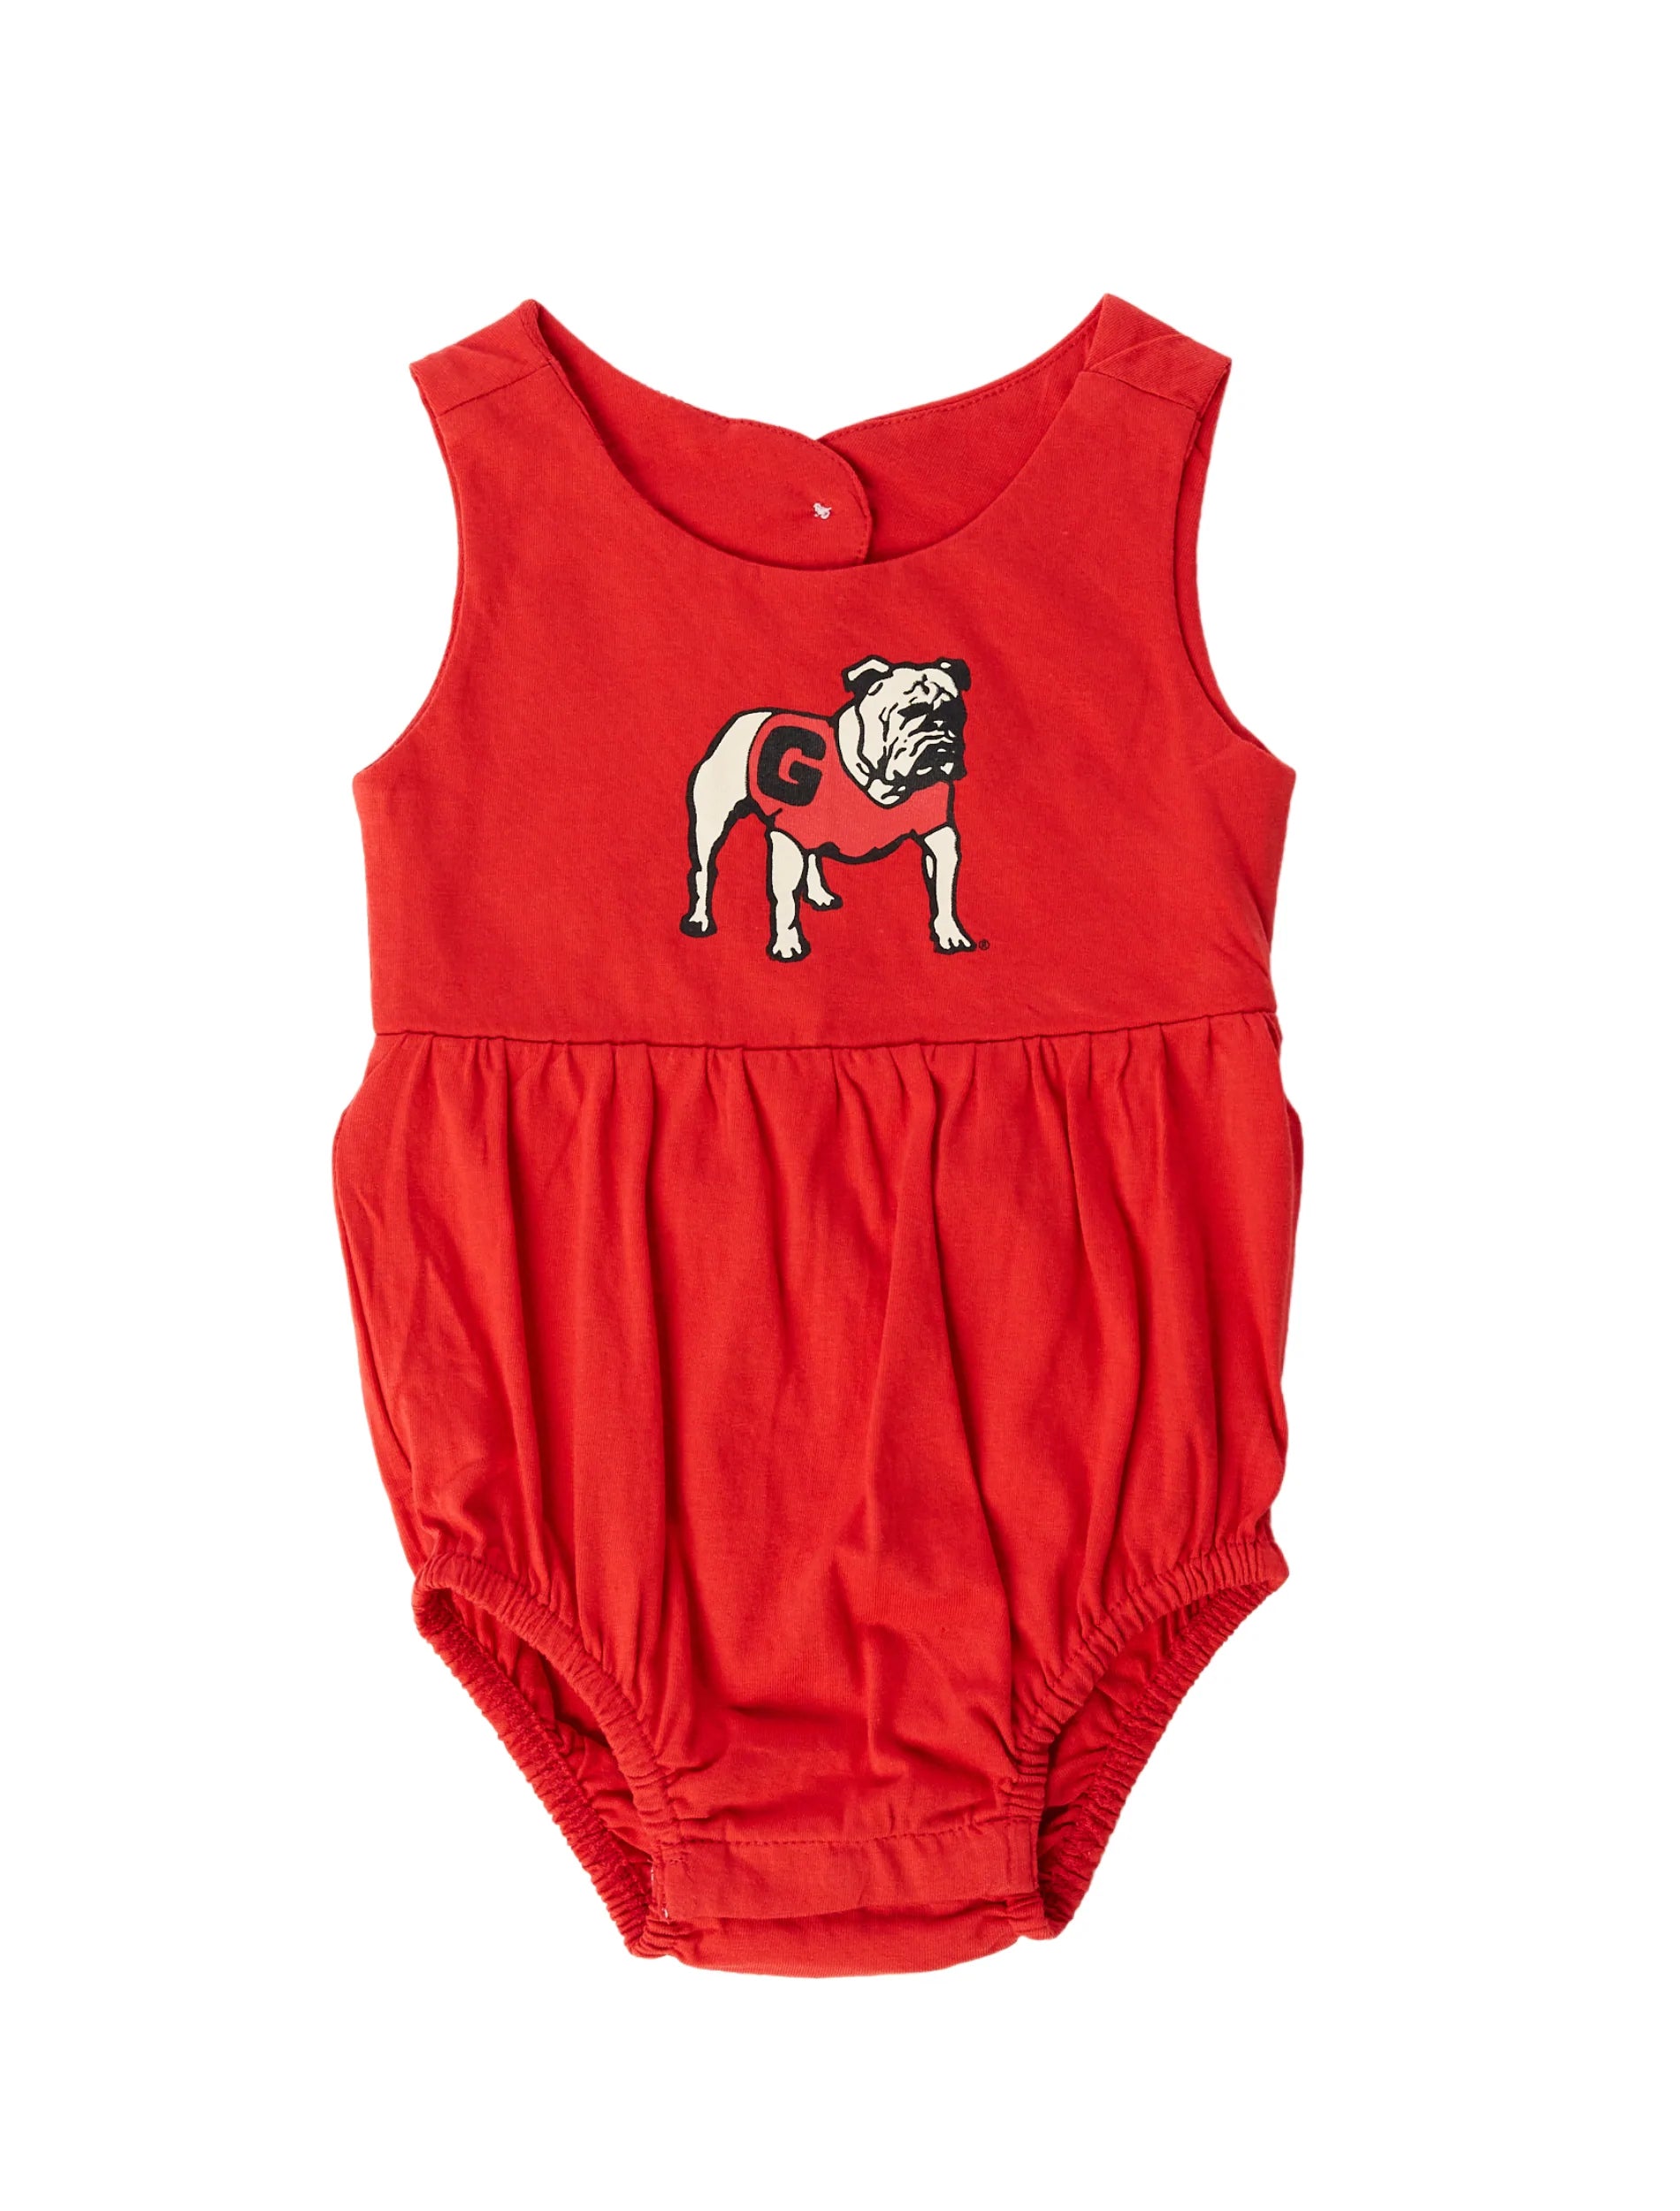 UGA Cut Out Bubble One Piece